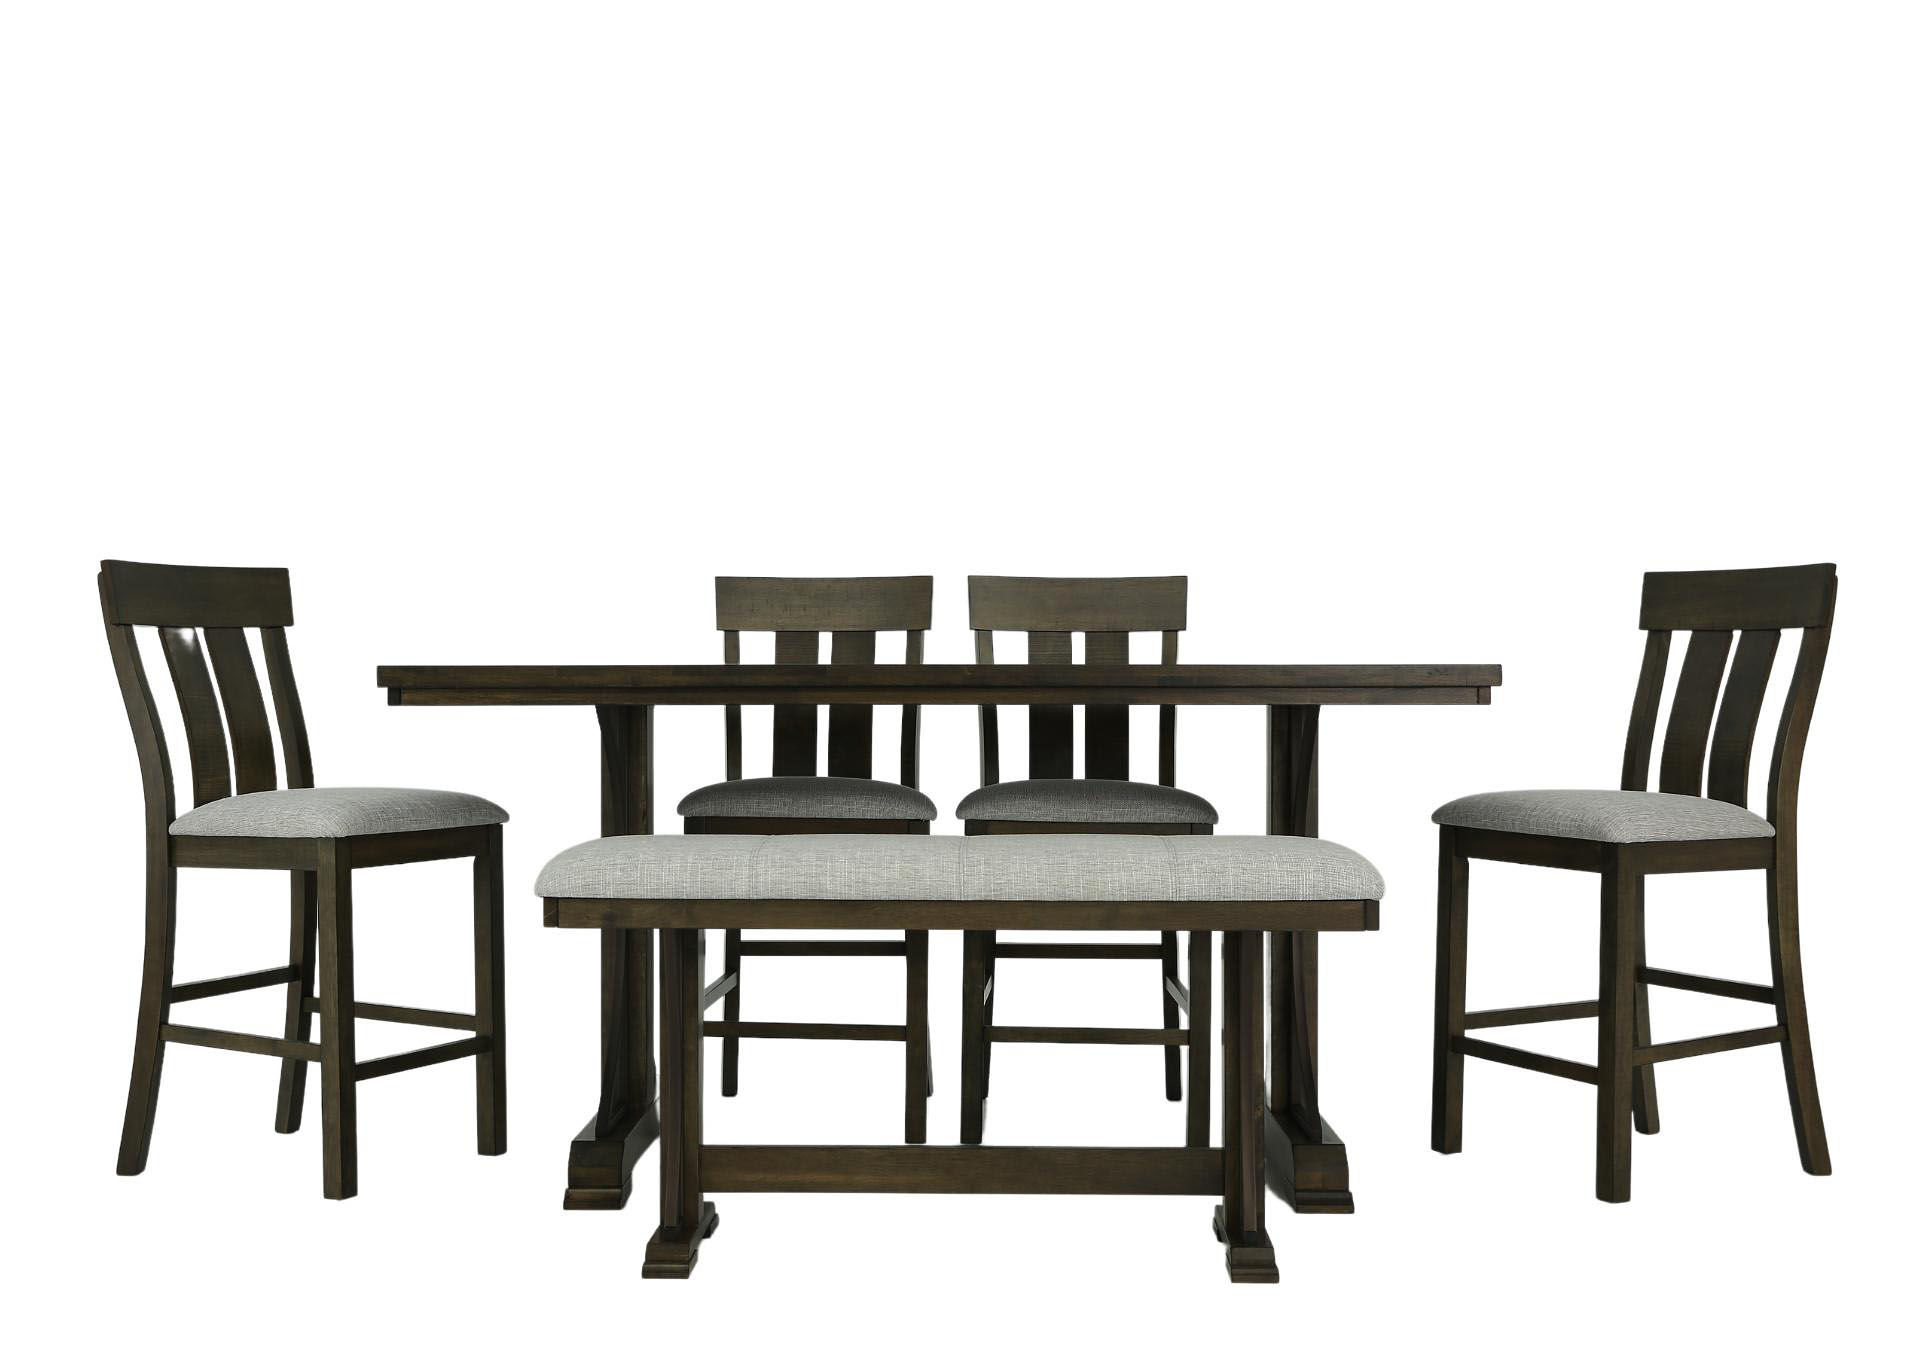 QUINCY 6 PIECE COUNTER HEIGHT TABLE SET,CROWN MARK INT.